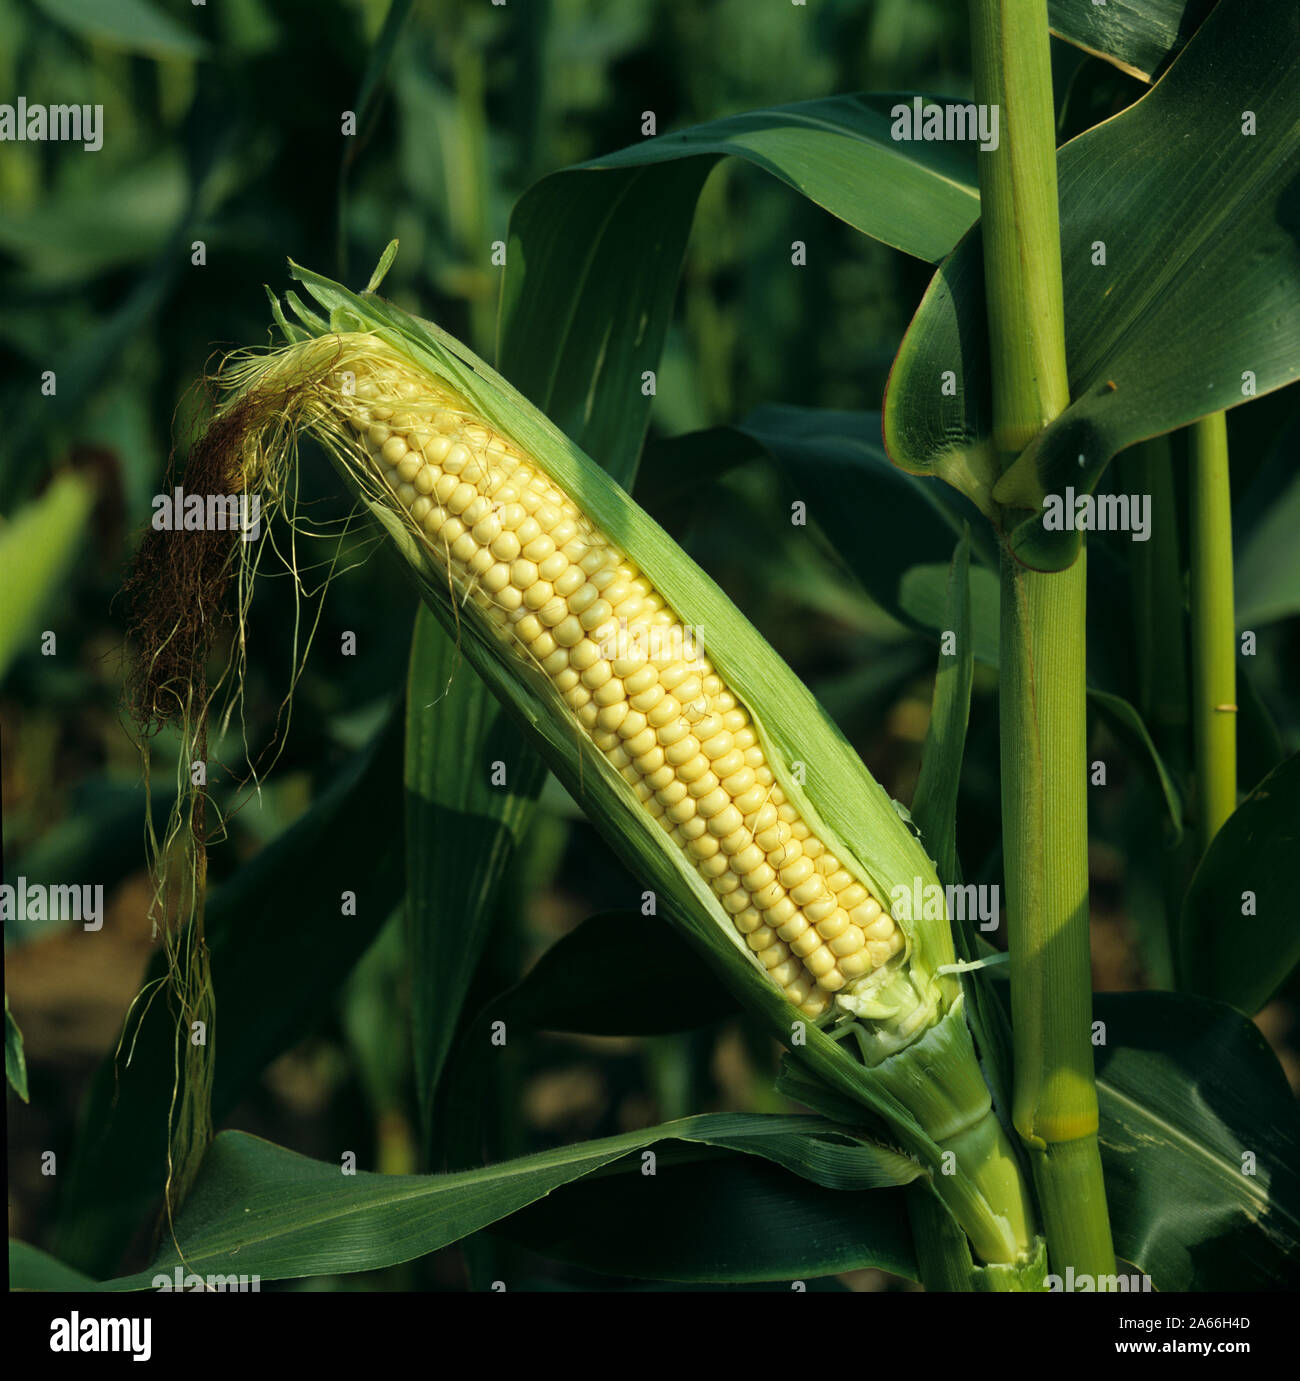 Husk taken off to show kernels of corn in a forage maize crop grown for livestock feed, Berkshire, September Stock Photo